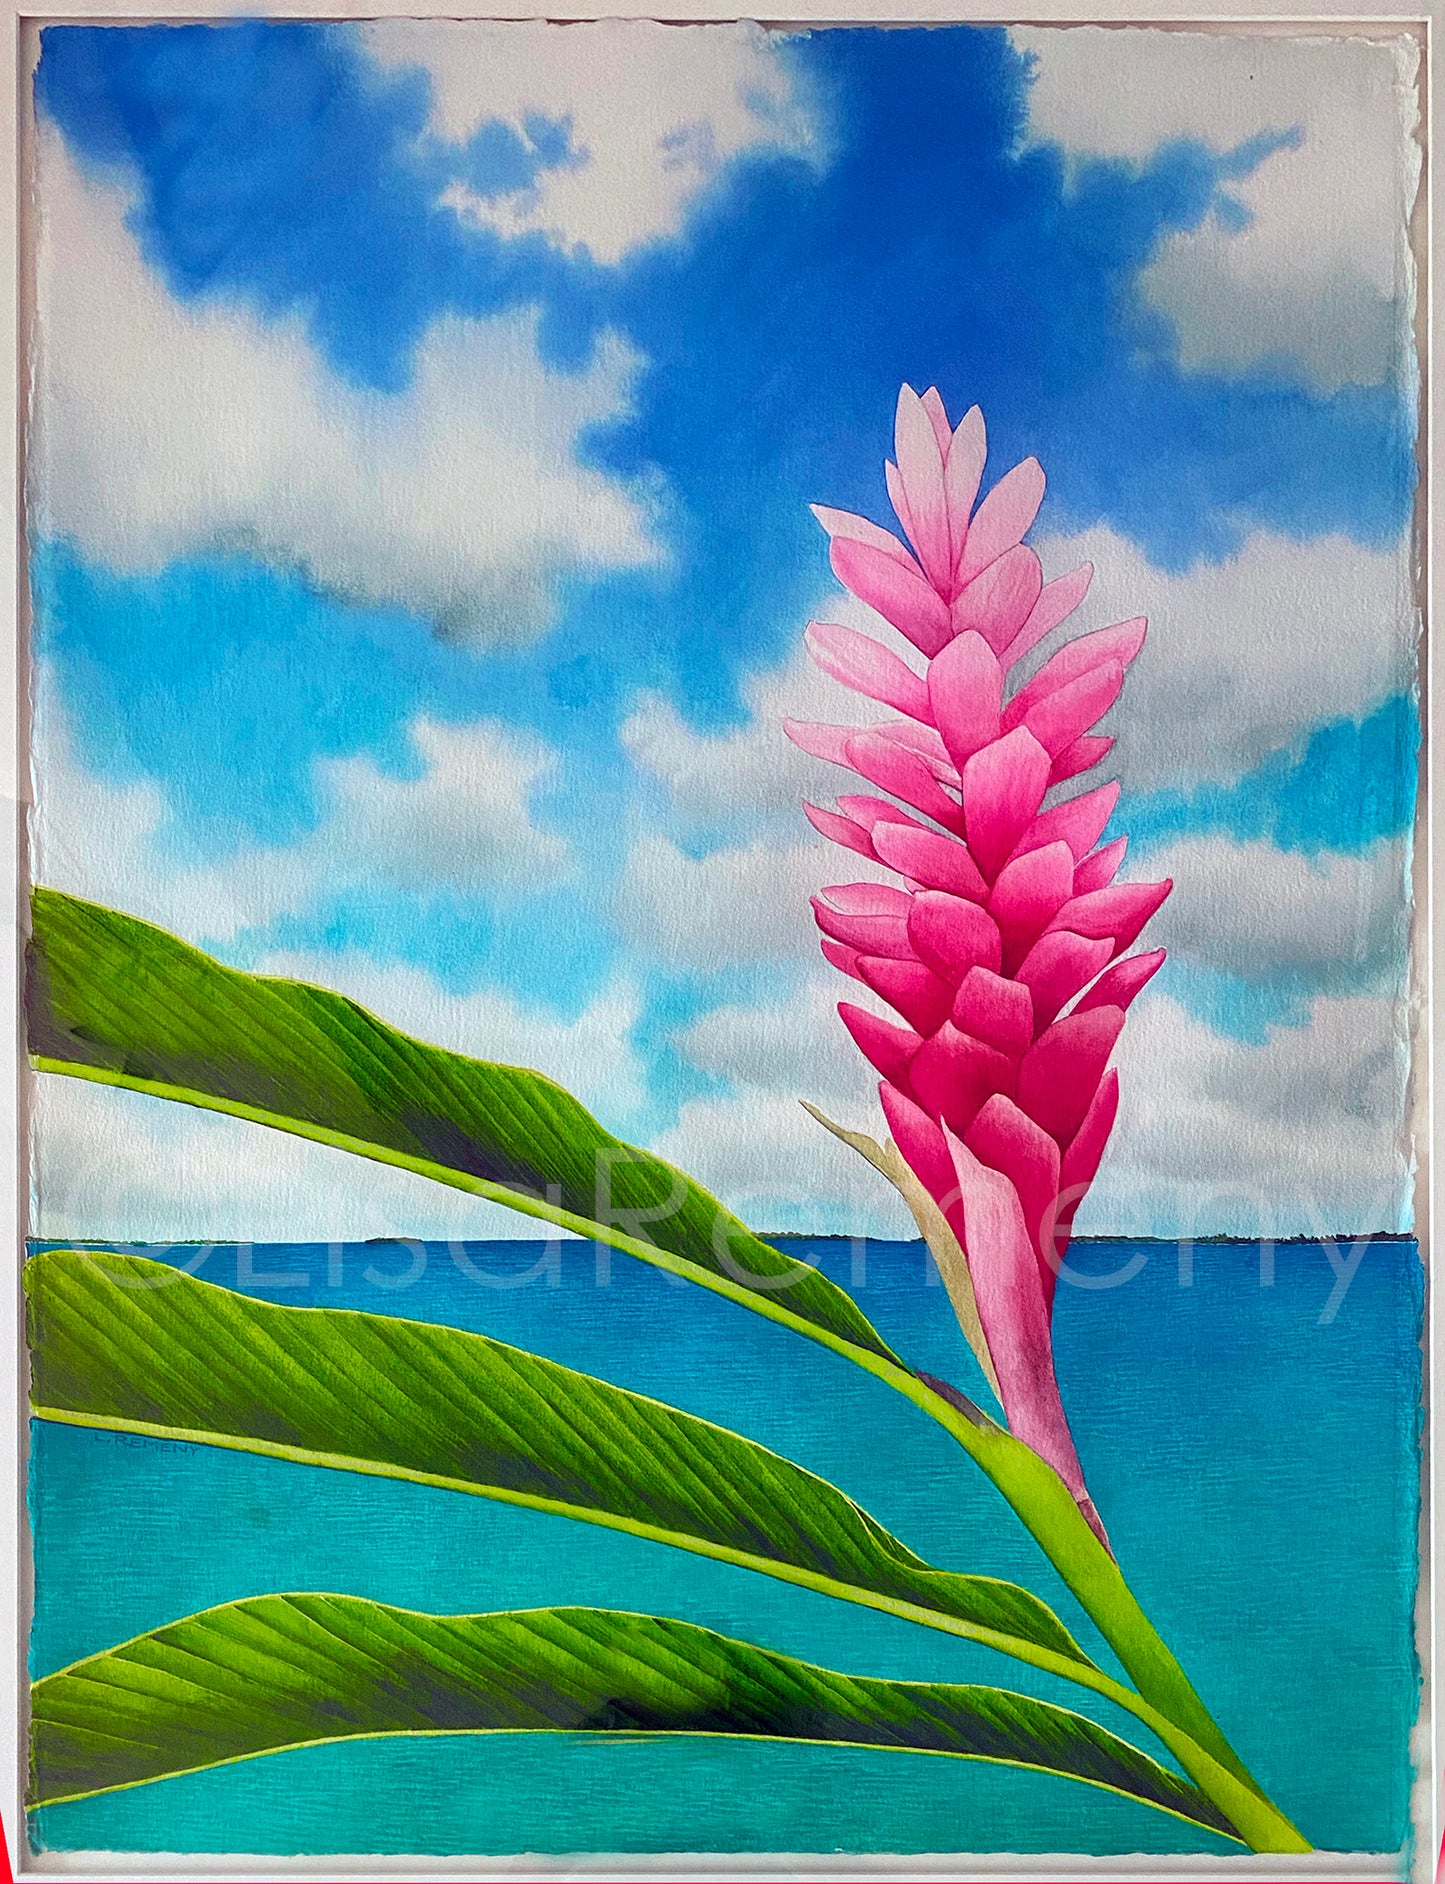 Archive Watercolor on Paper - Pink Ginger Lily